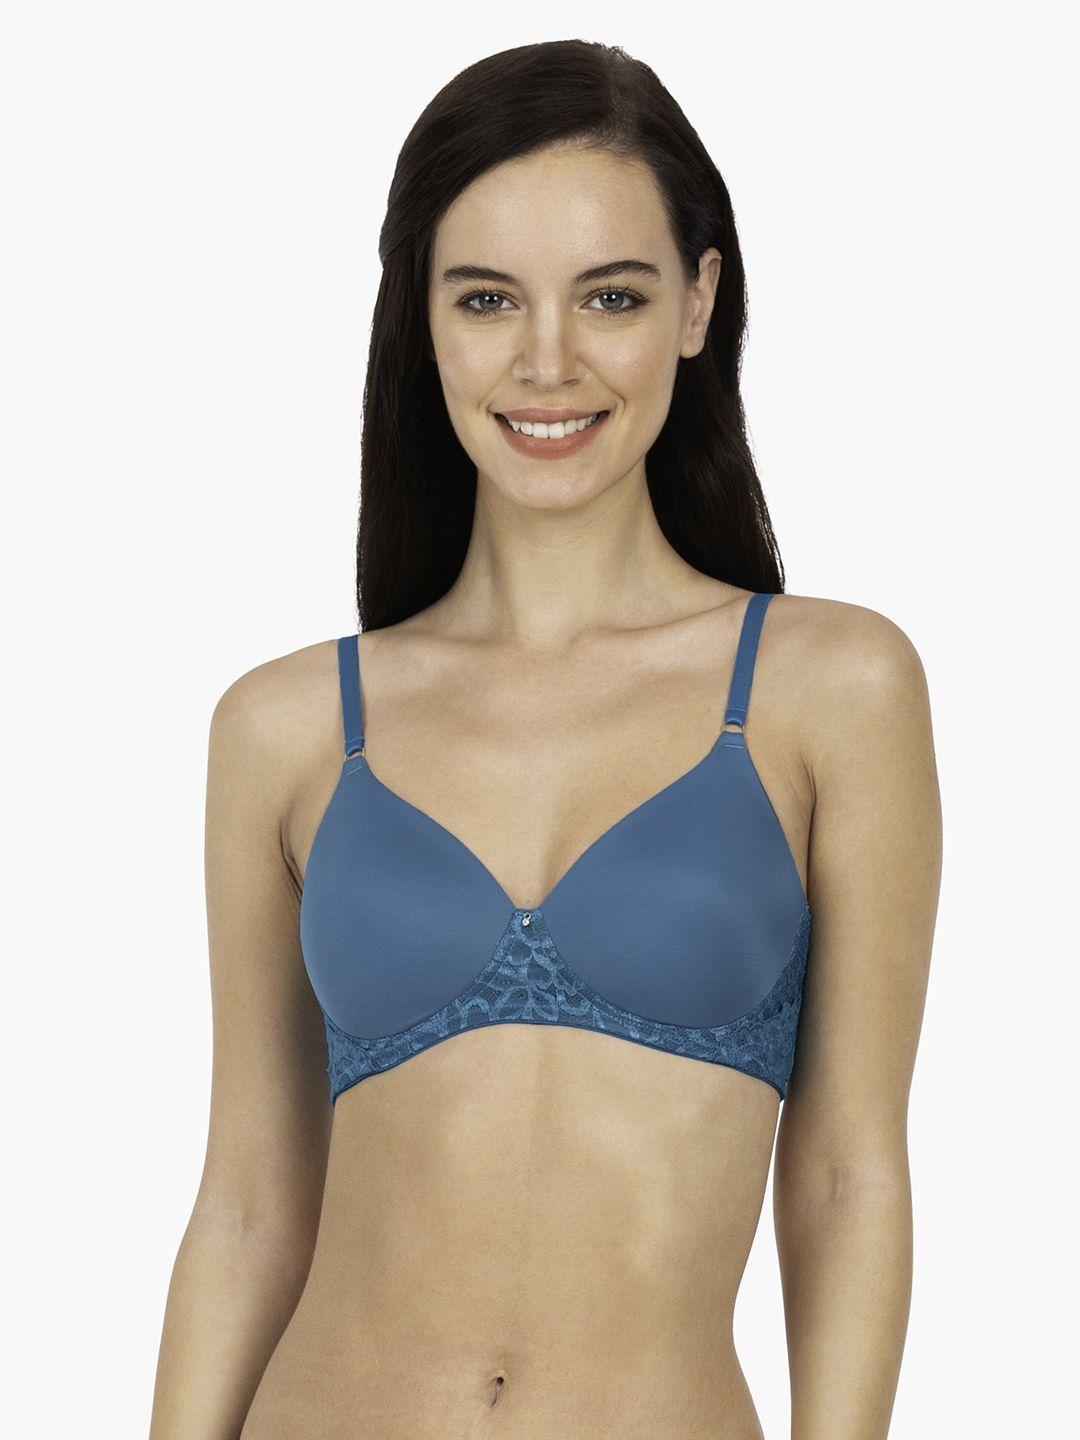 amante-turquoise-blue-lace-non-wired-lightly-padded-t-shirt-bra-bra73901